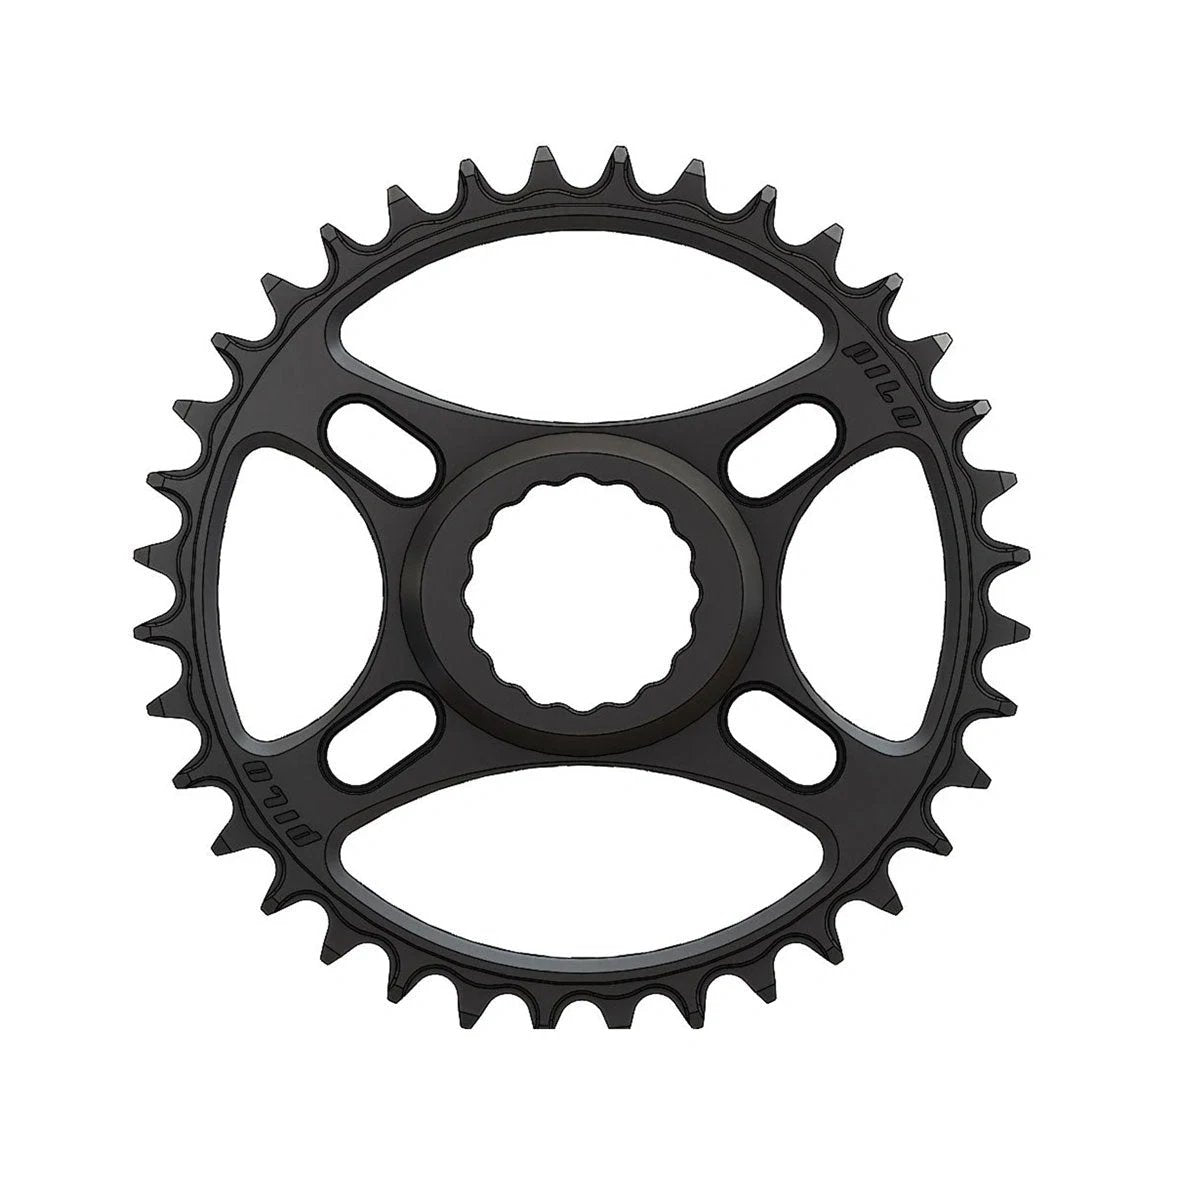 Pilo 36T Race Hg Chainring For Cranks - Chain Rings